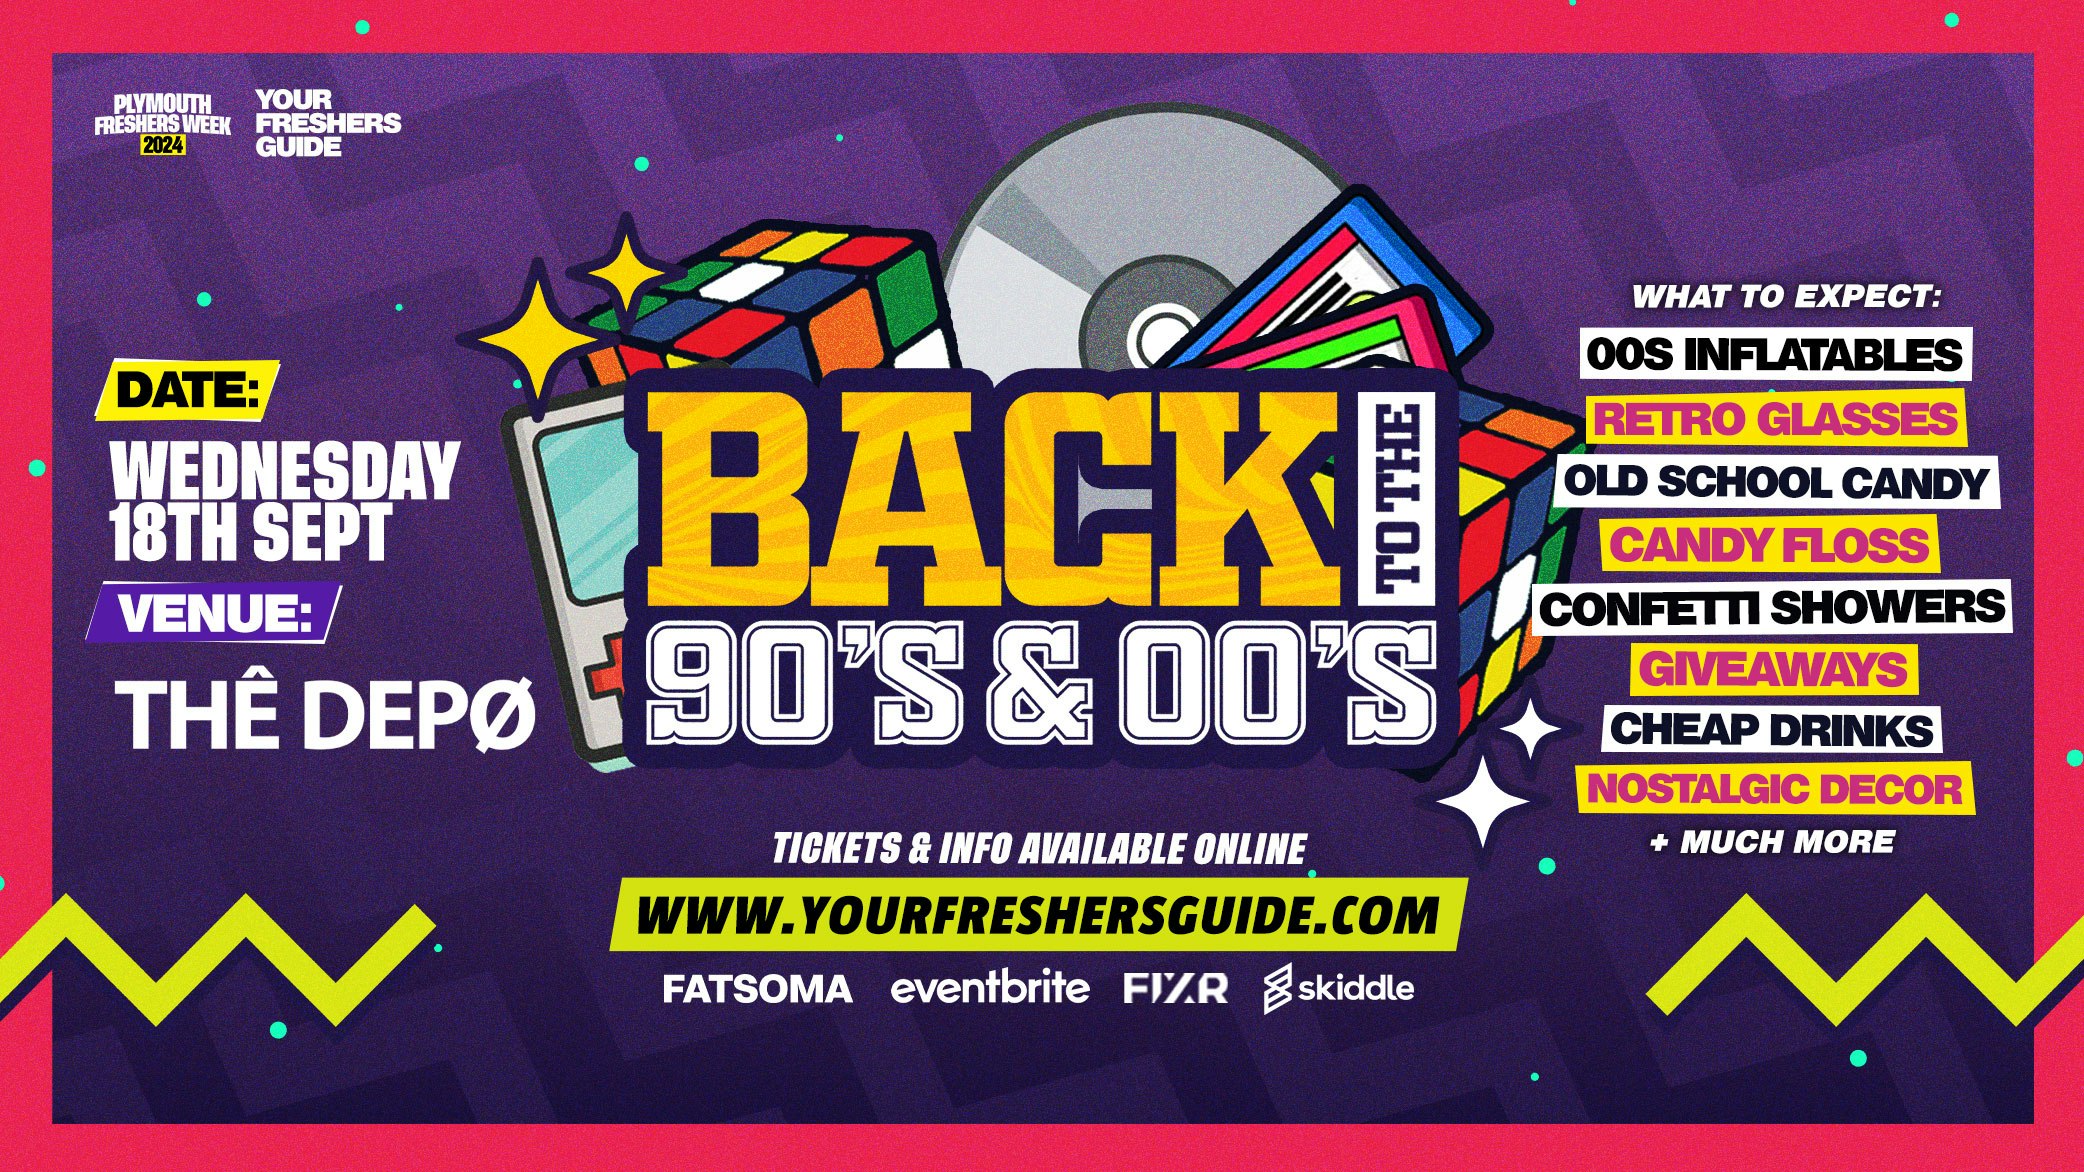 Back to the 90s & 00s | Plymouth Freshers 2024